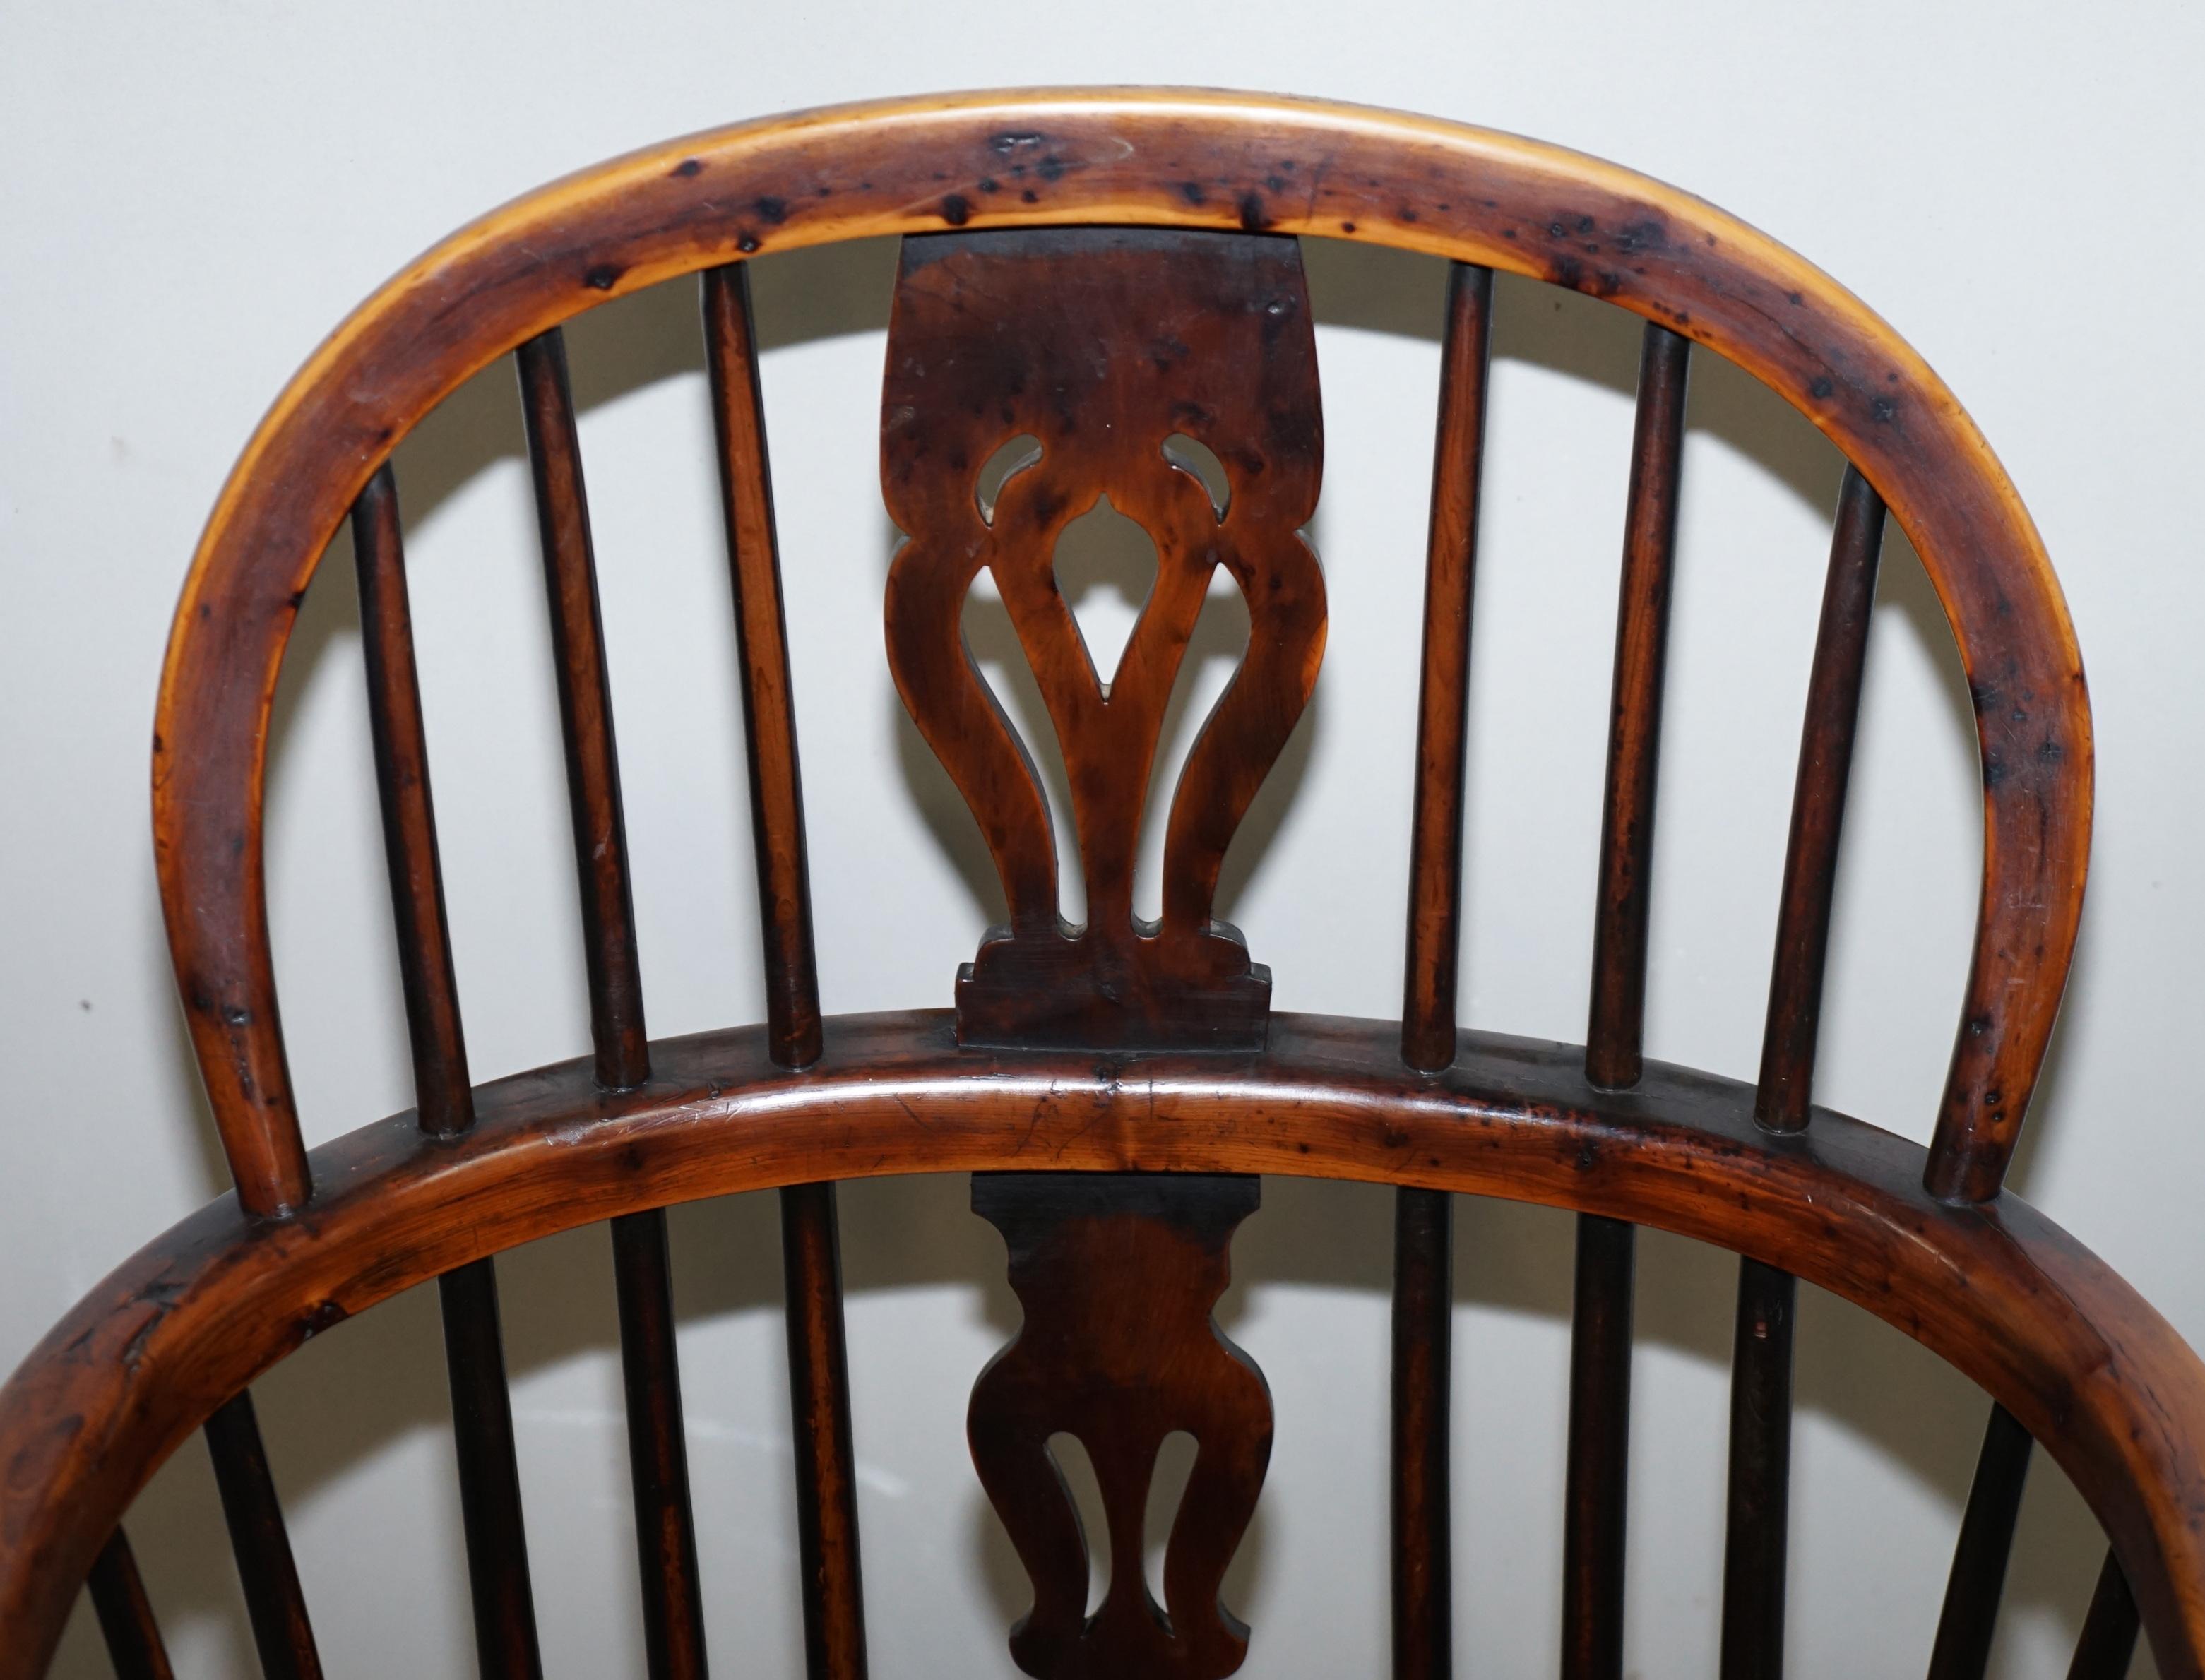 Hand-Crafted Pair of Burr Yew Wood and Elm Windsor Armchairs circa 1860 English Country House For Sale